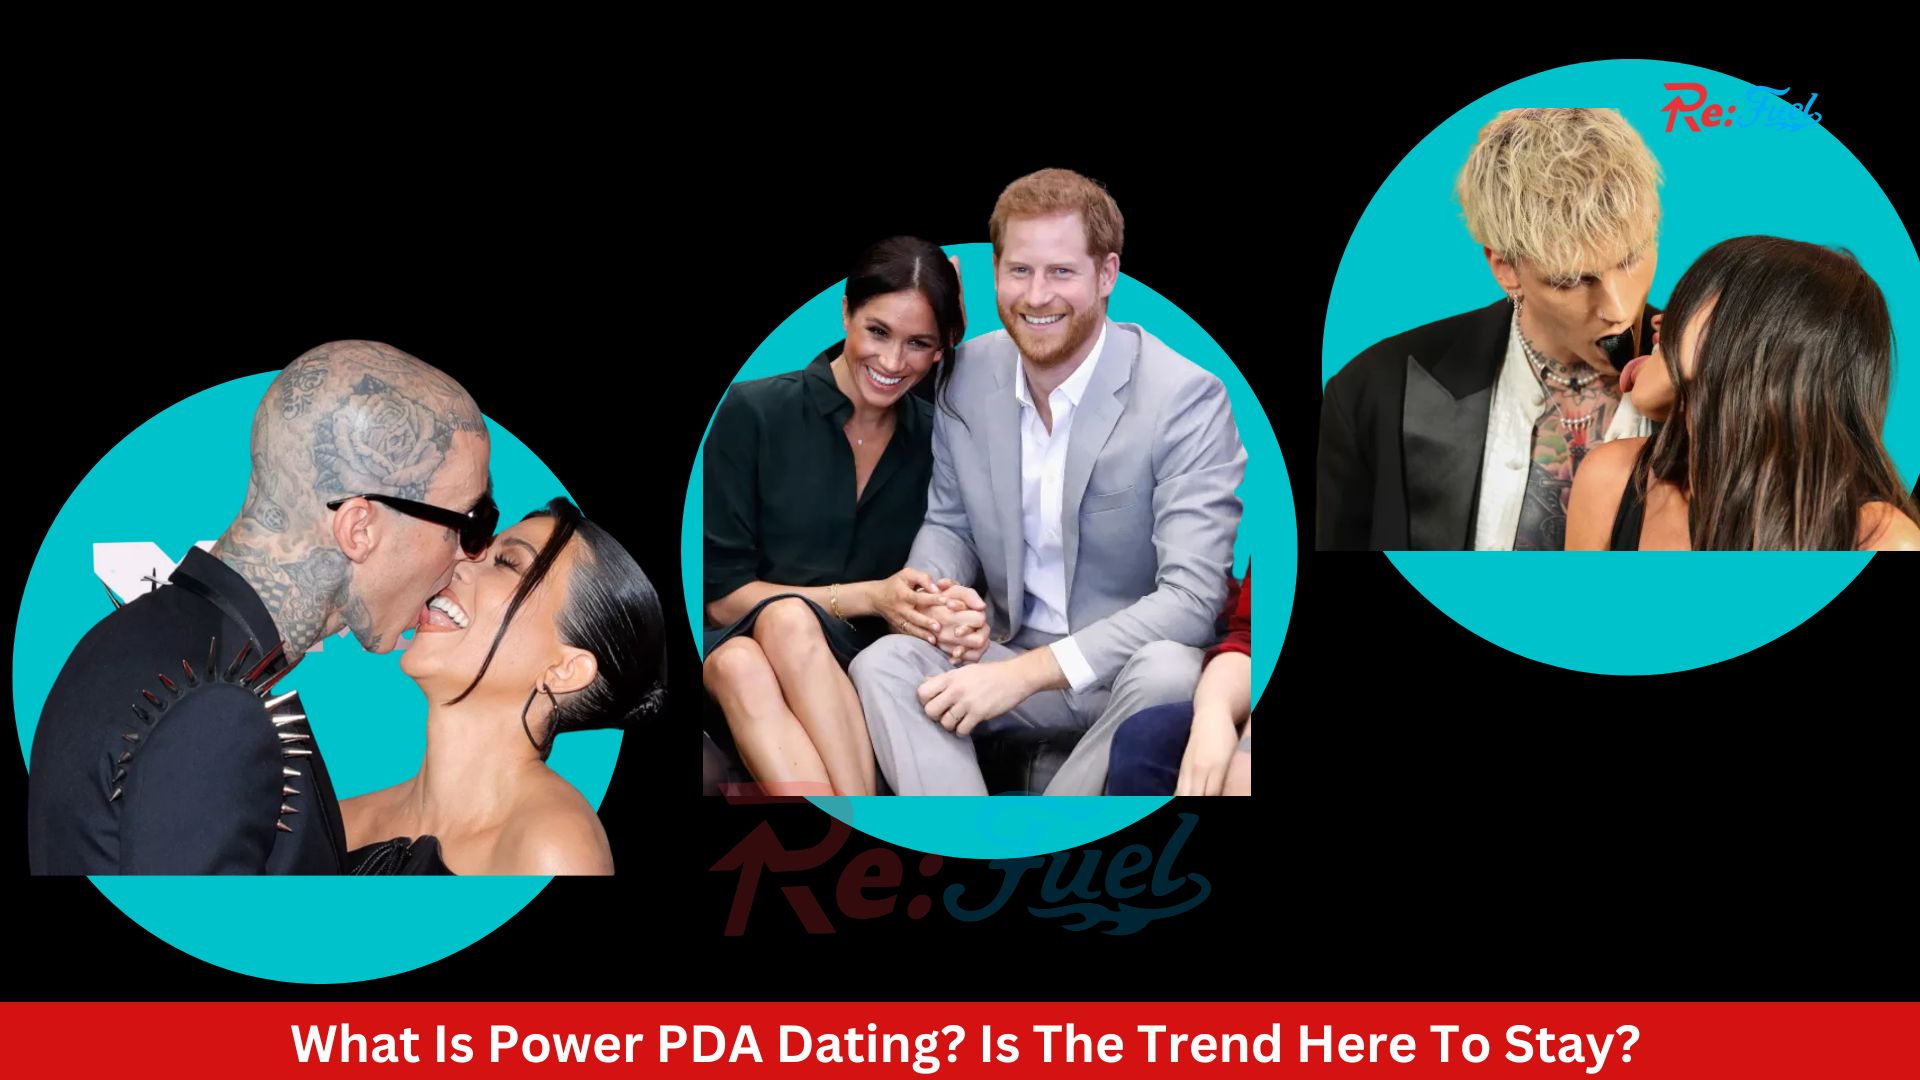 What Is Power PDA Dating? Is The Trend Here To Stay?